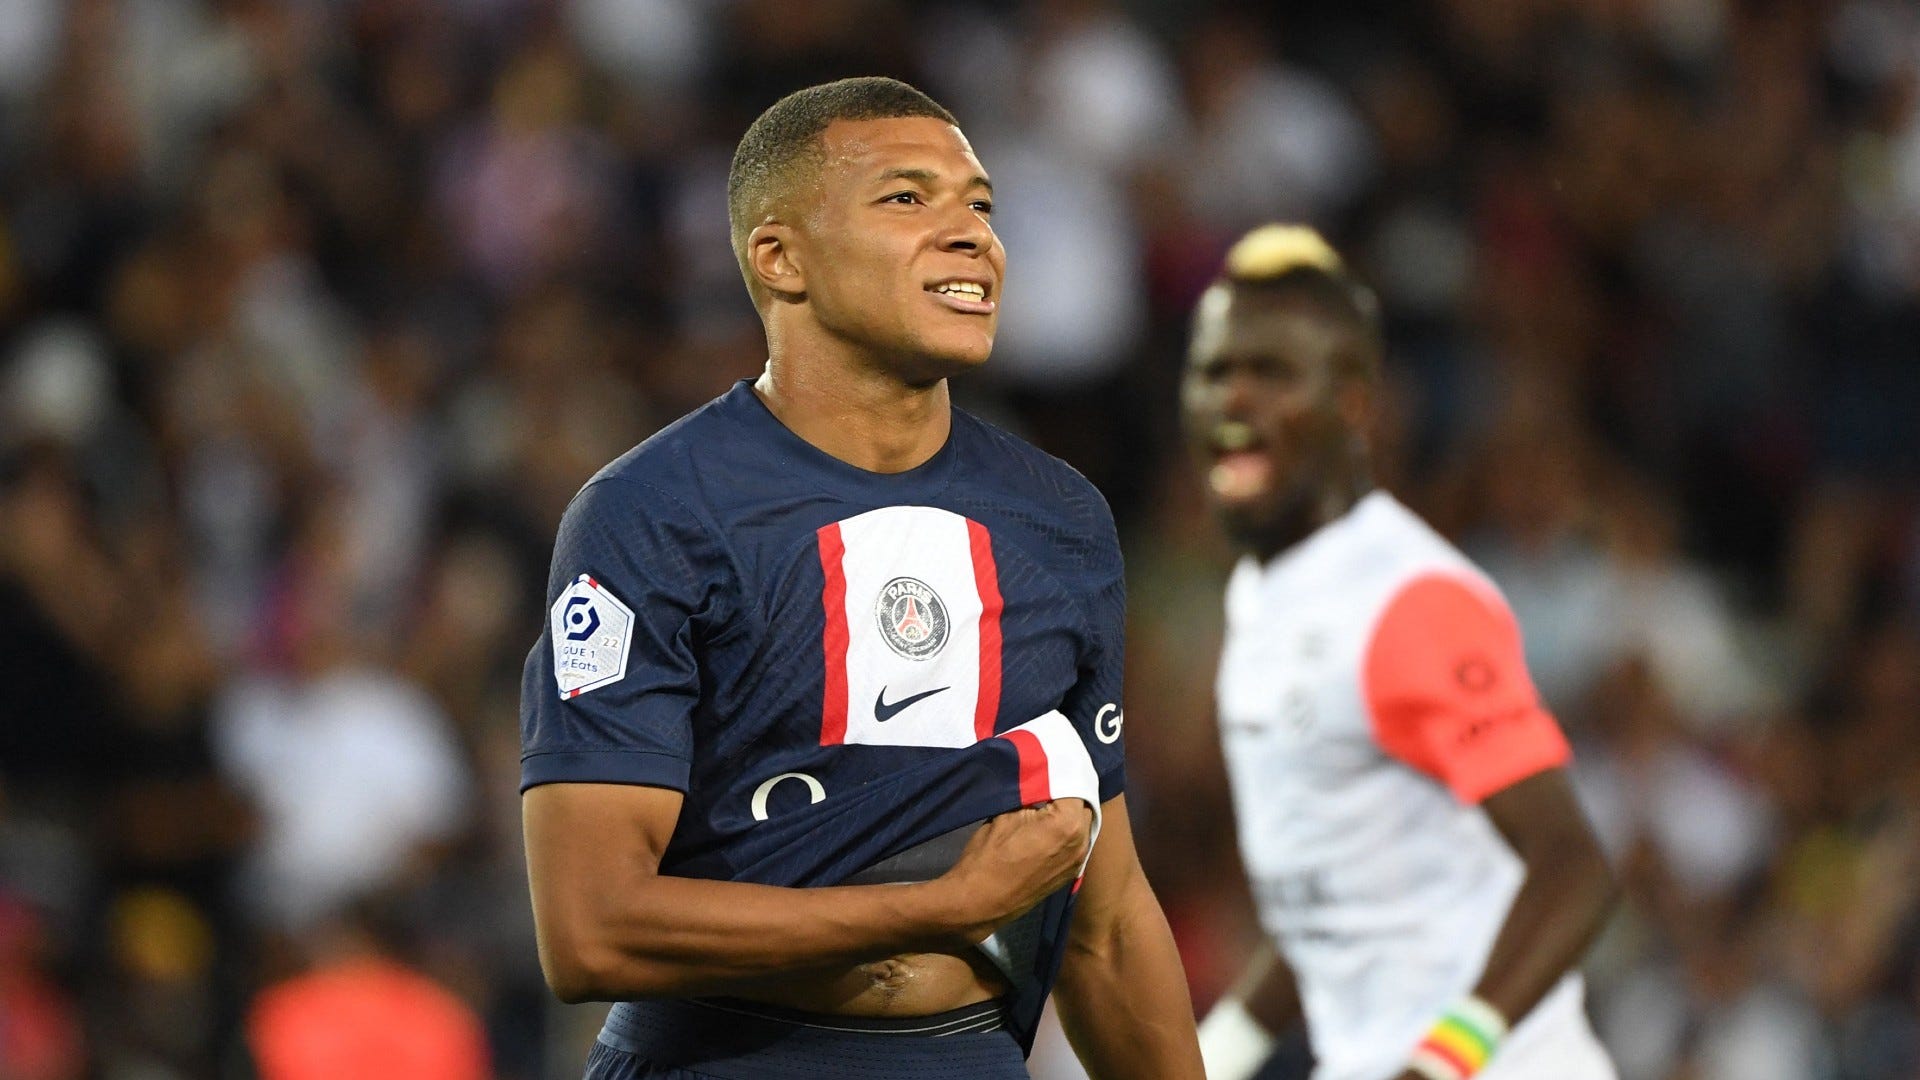 'Mbappe has nothing to prove to anyone' - PSG star defended by Henry after on-pitch sulk vs Montpellier | Goal.com UK